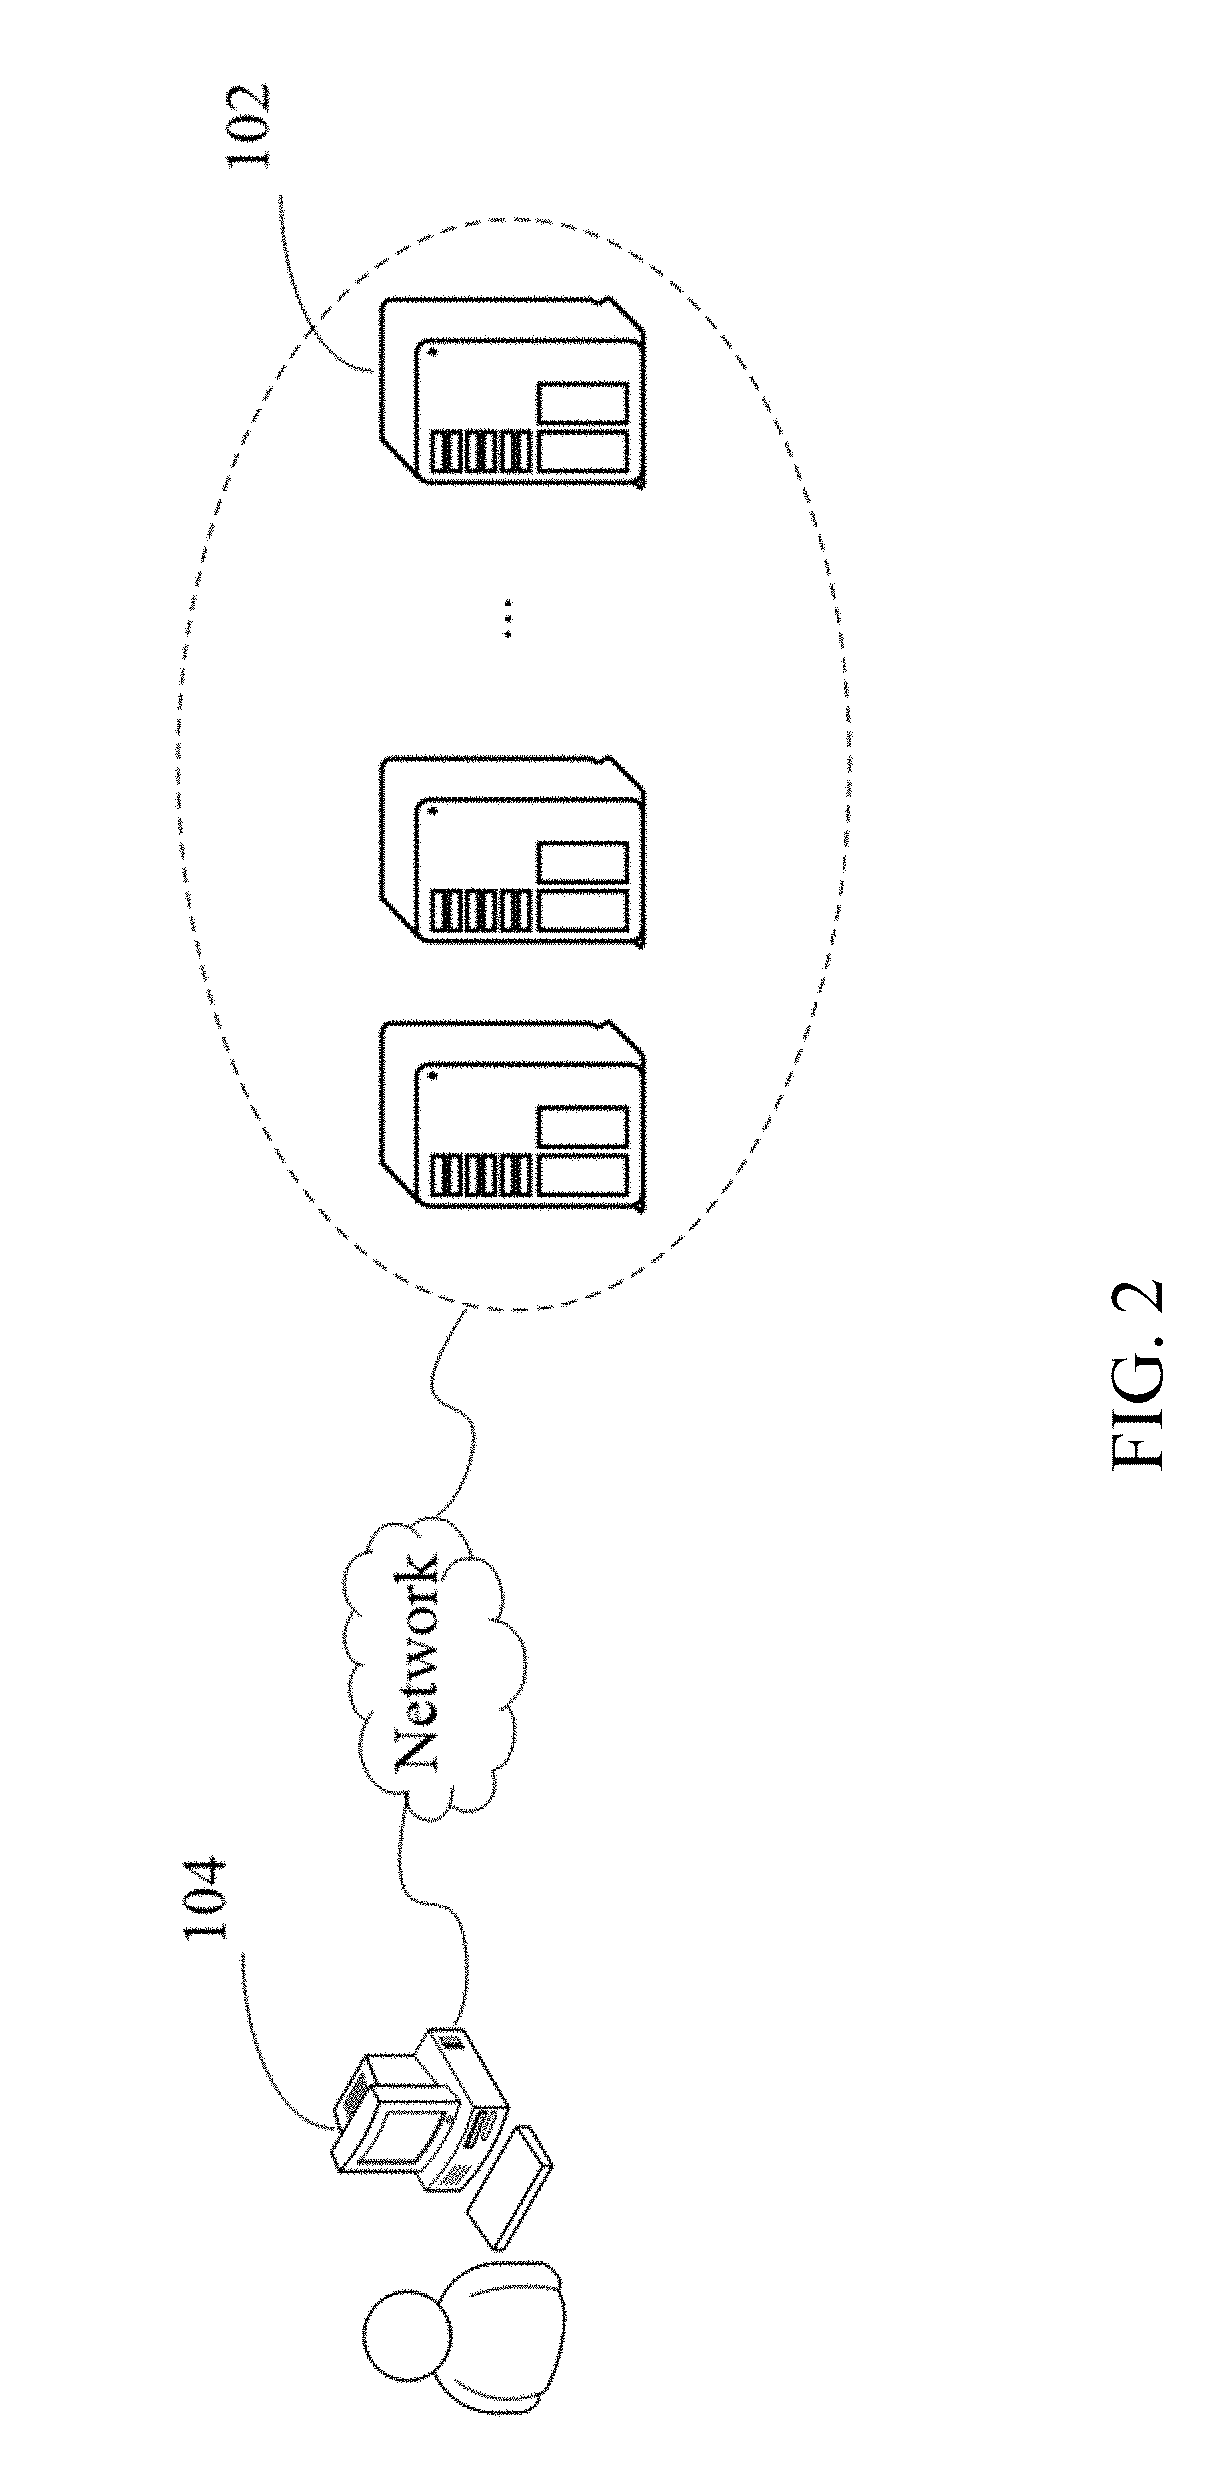 Facial tracking method and apparatus, storage medium, and electronic device